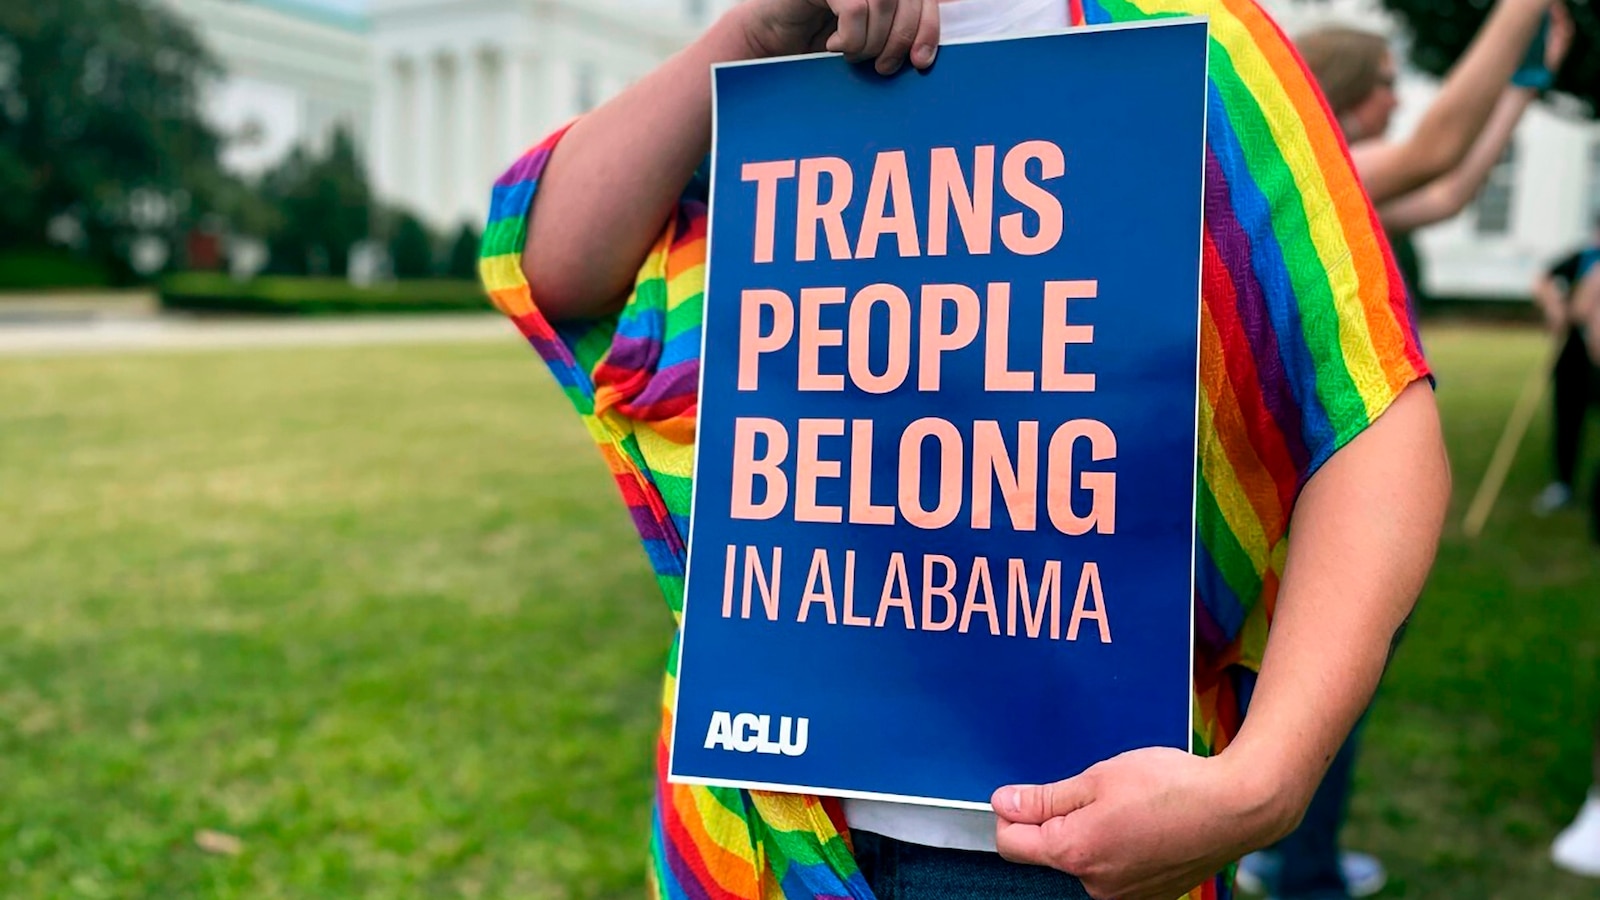 Expanded so-called 'Don't Say Gay' education restrictions advance in Alabama